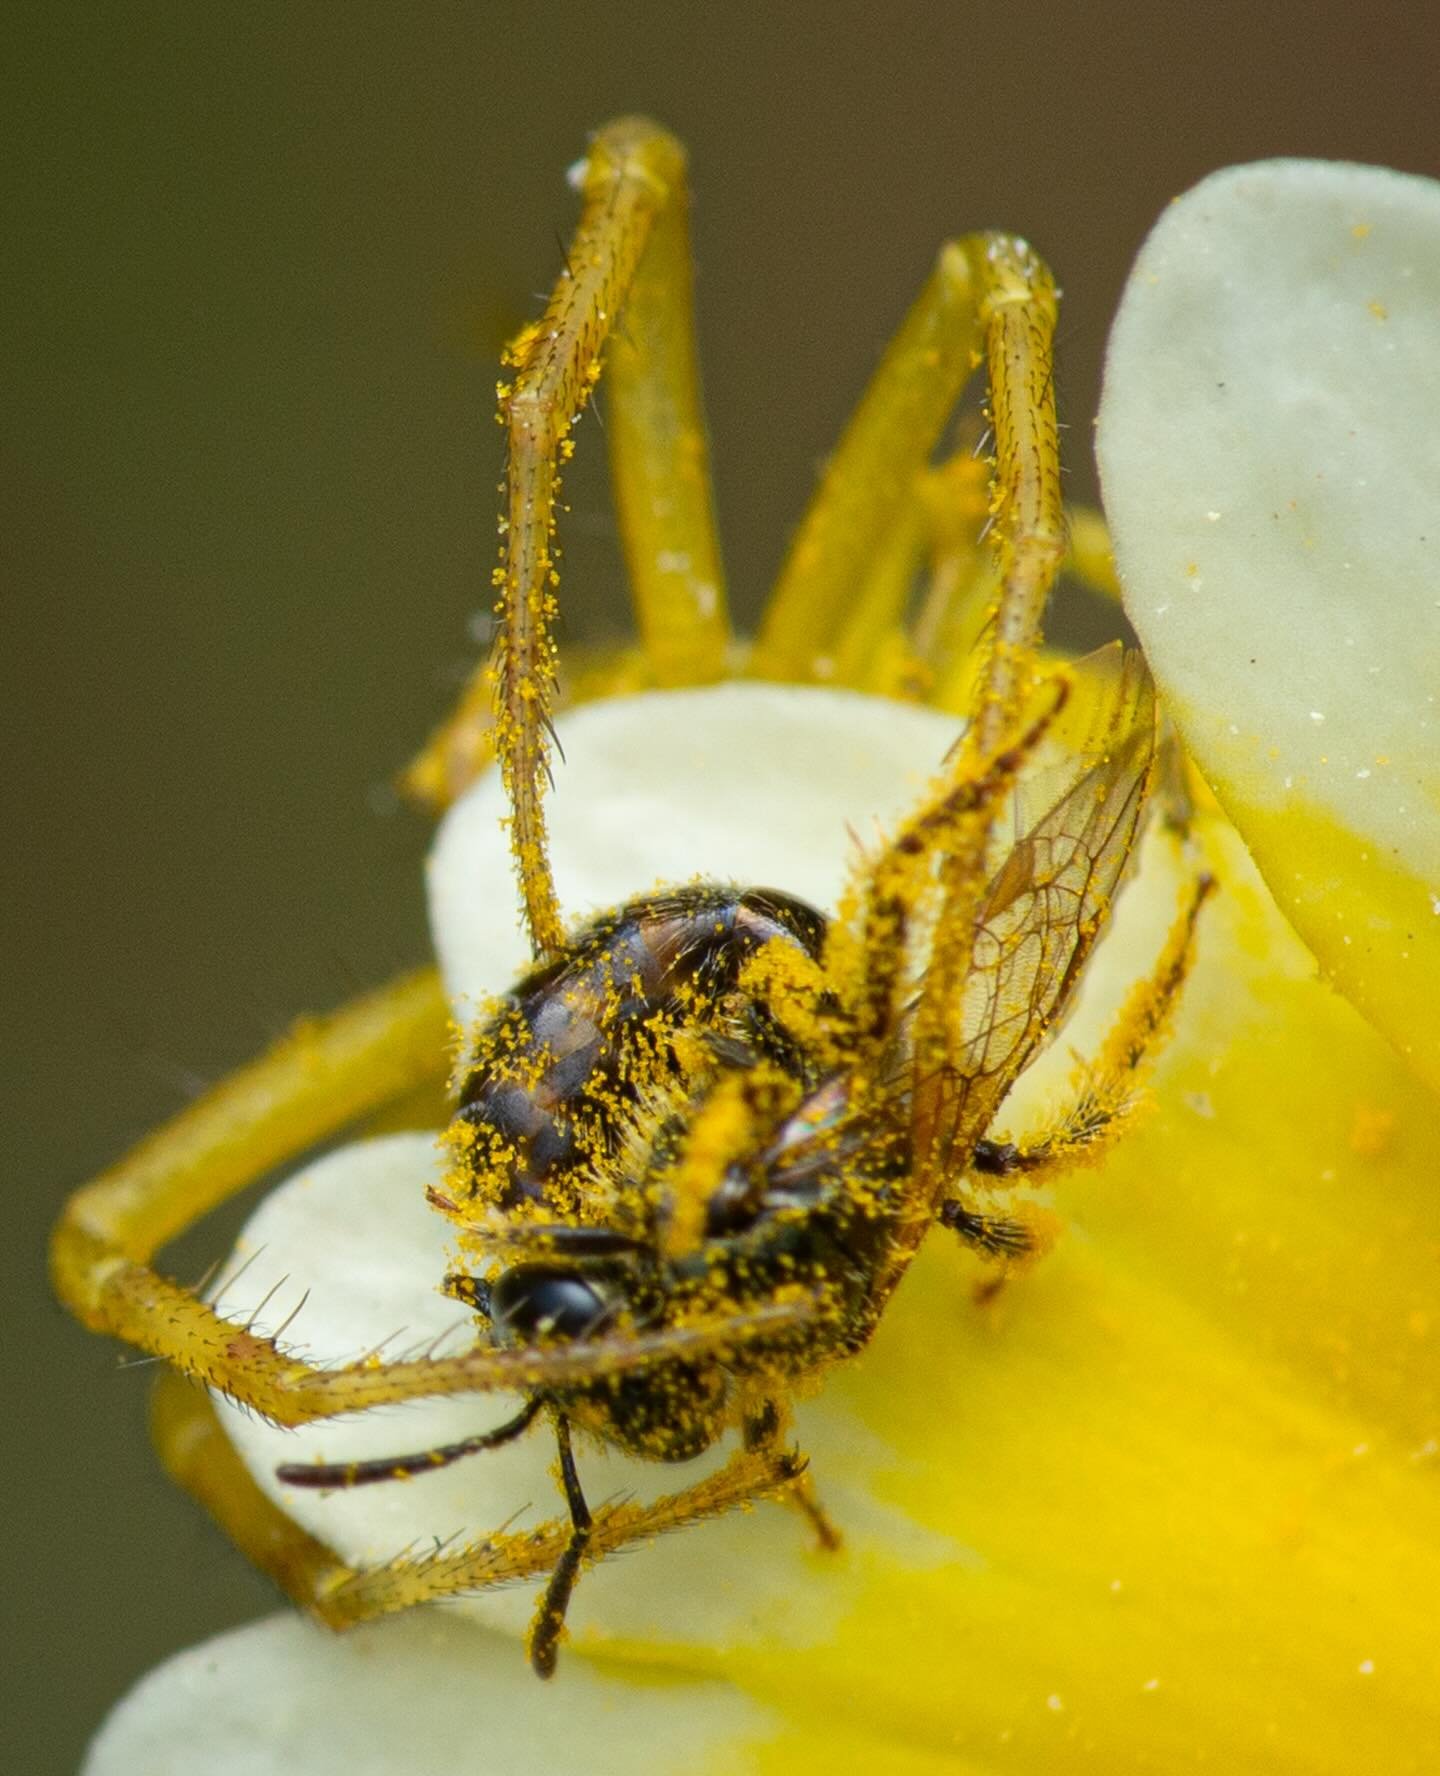 Catch and Release?
.
Assisted by the hawk-like eyes of @beesip , I photographed this diminutive Halictus tripartitus in the (assumed) death grip of a crab spider. But miraculously, she busted out a spinning, Aikido-esque maneuver and flew off to resu